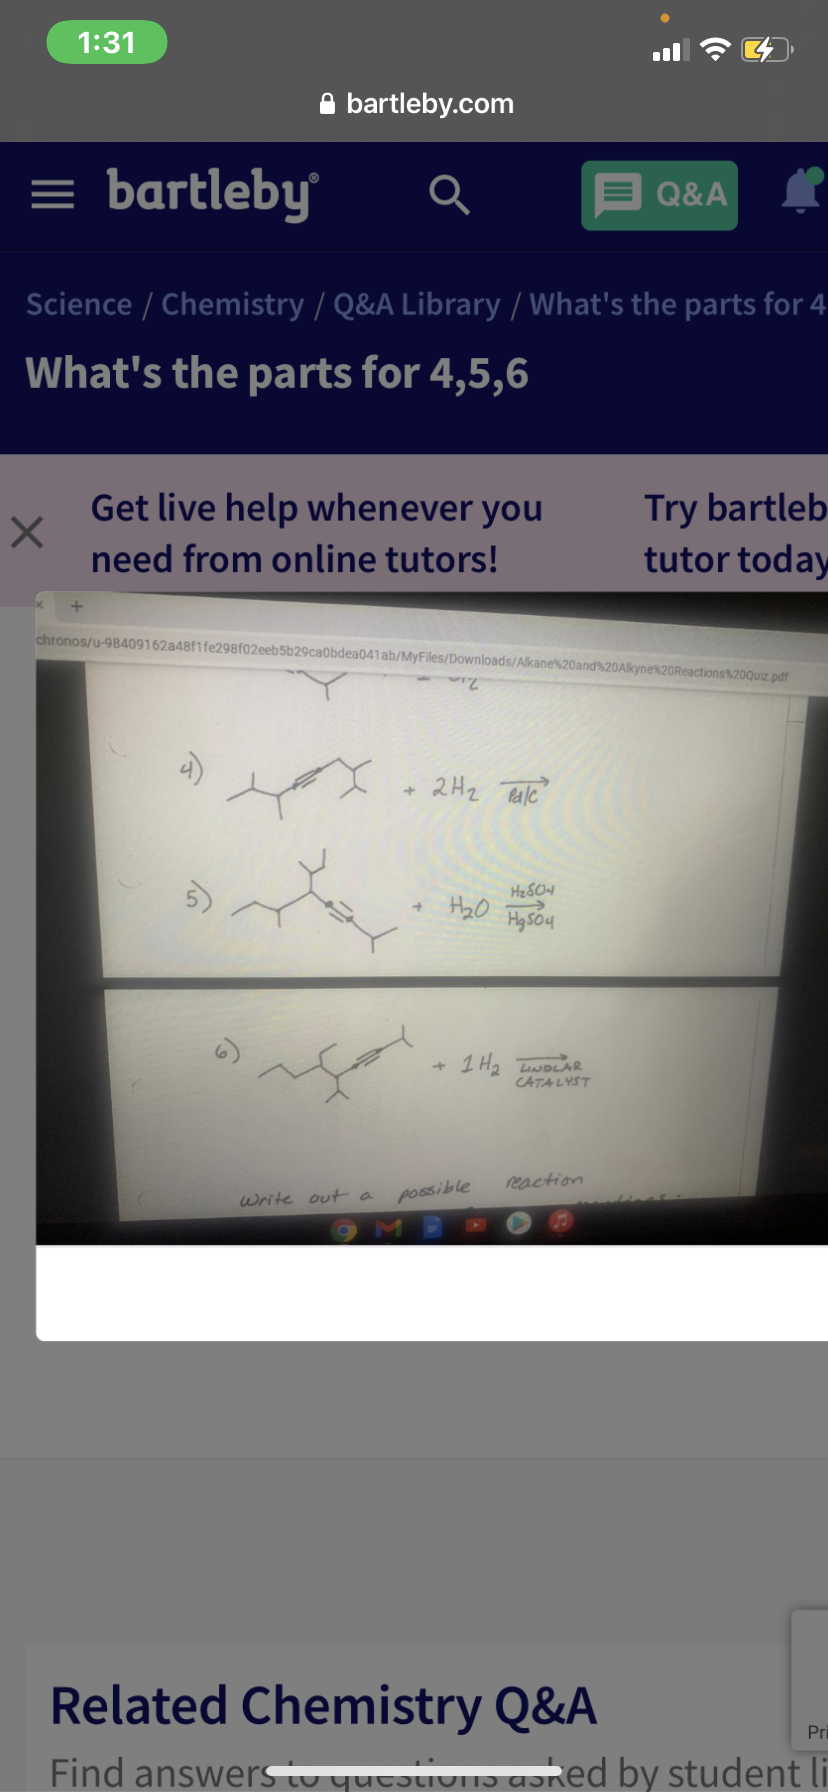 1:31
A bartleby.com
= bartleby
Q&A
Science / Chemistry / Q&A Library / What's the parts for 4
What's the parts for 4,5,6
Try bartleb
tutor today
Get live help whenever you
need from online tutors!
chronos/u-98409162a48f1fe298f02eeb5b29caobdea041ab/MyFiles/Downloads/Alkane%20and%20Alkyne%20Reactions%20Quiz pdf
2H2 TRale
1 H2 TNDLAR
CATALYST
reaction
write outa
possible
Related Chemistry Q&A
Pri
Find answersiu yutɔIVIT)
Csked by student li
